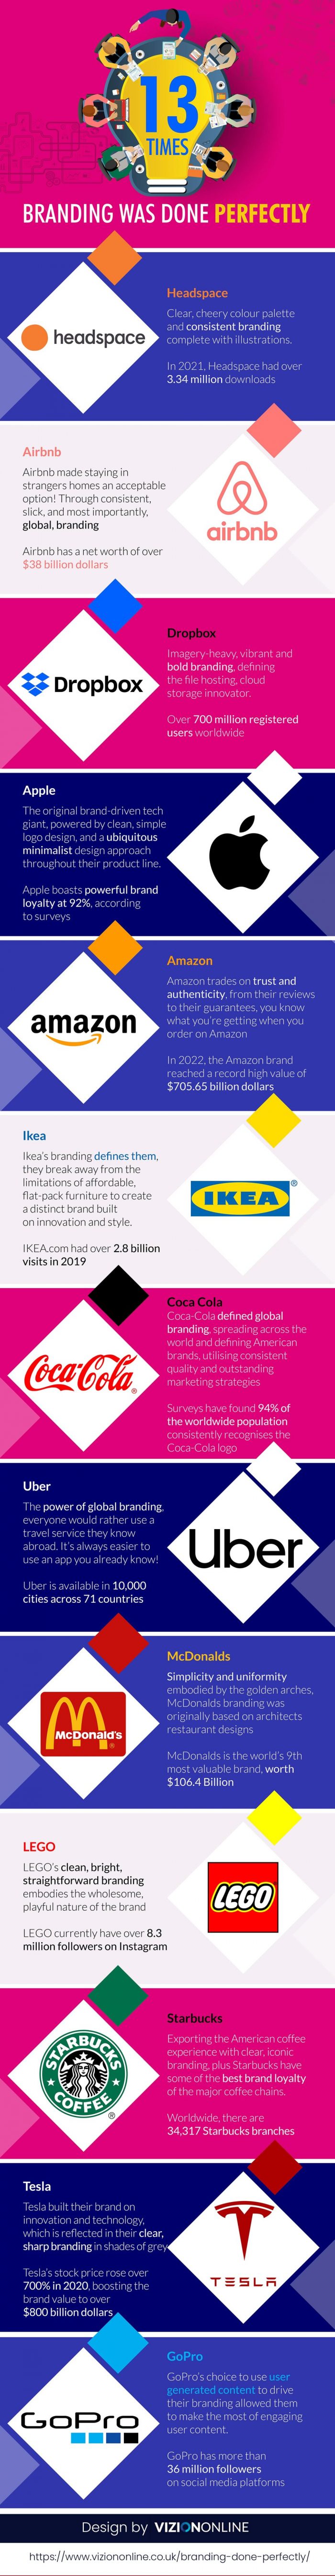 Perfect Examples Of Branding